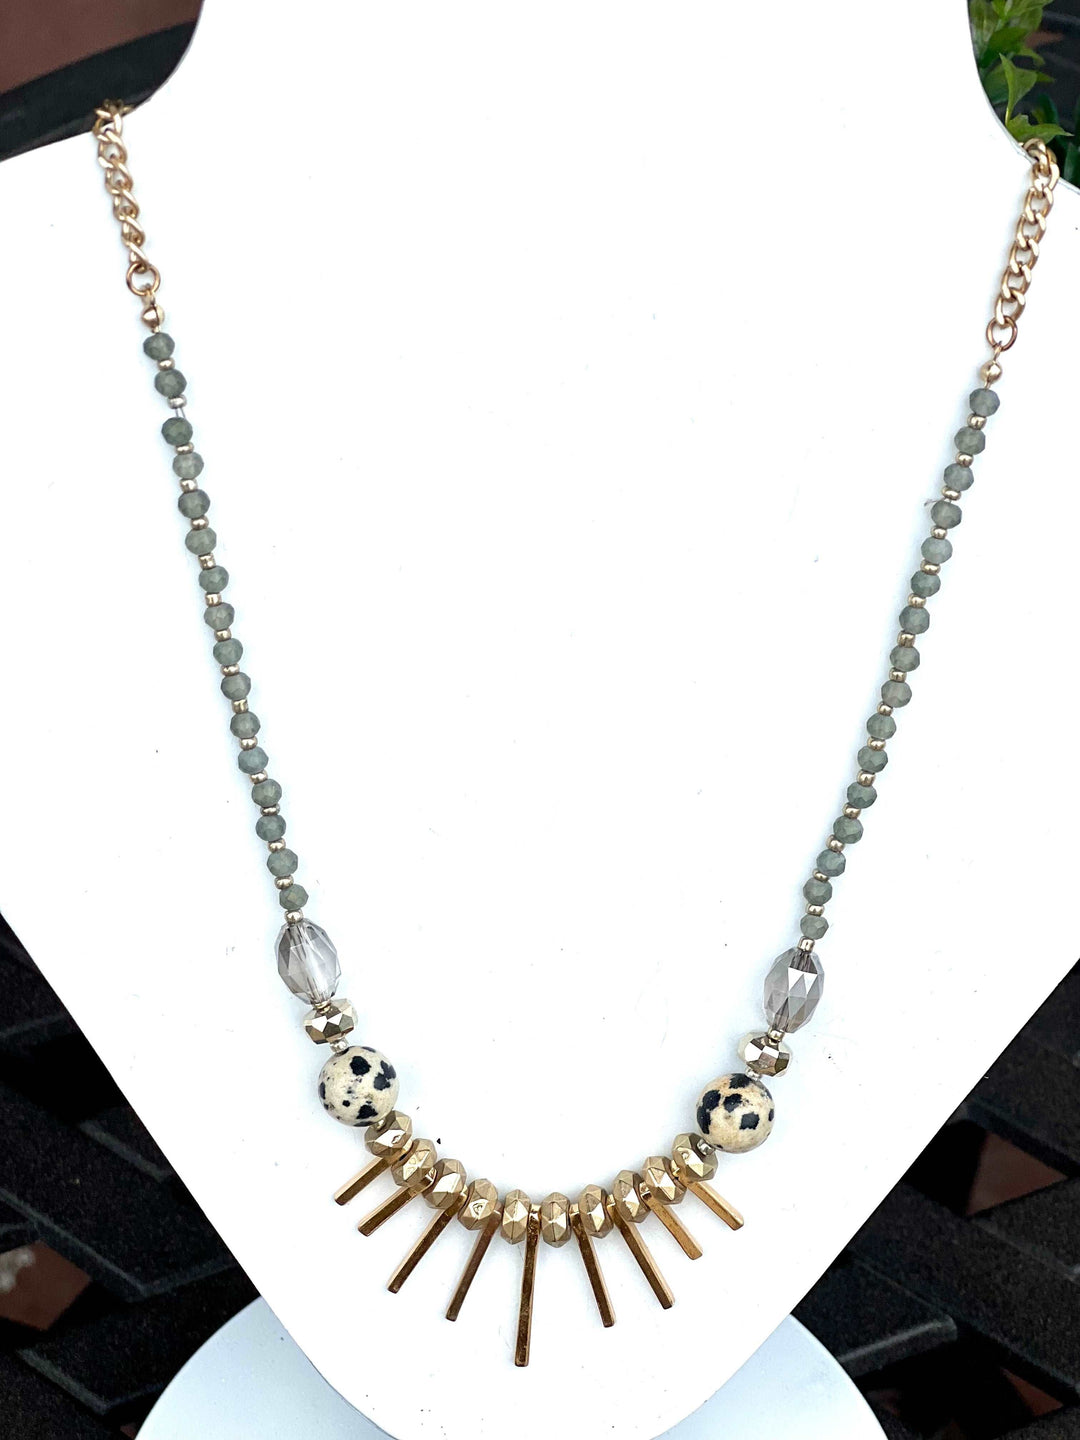 Gold necklace with gray beads and bars